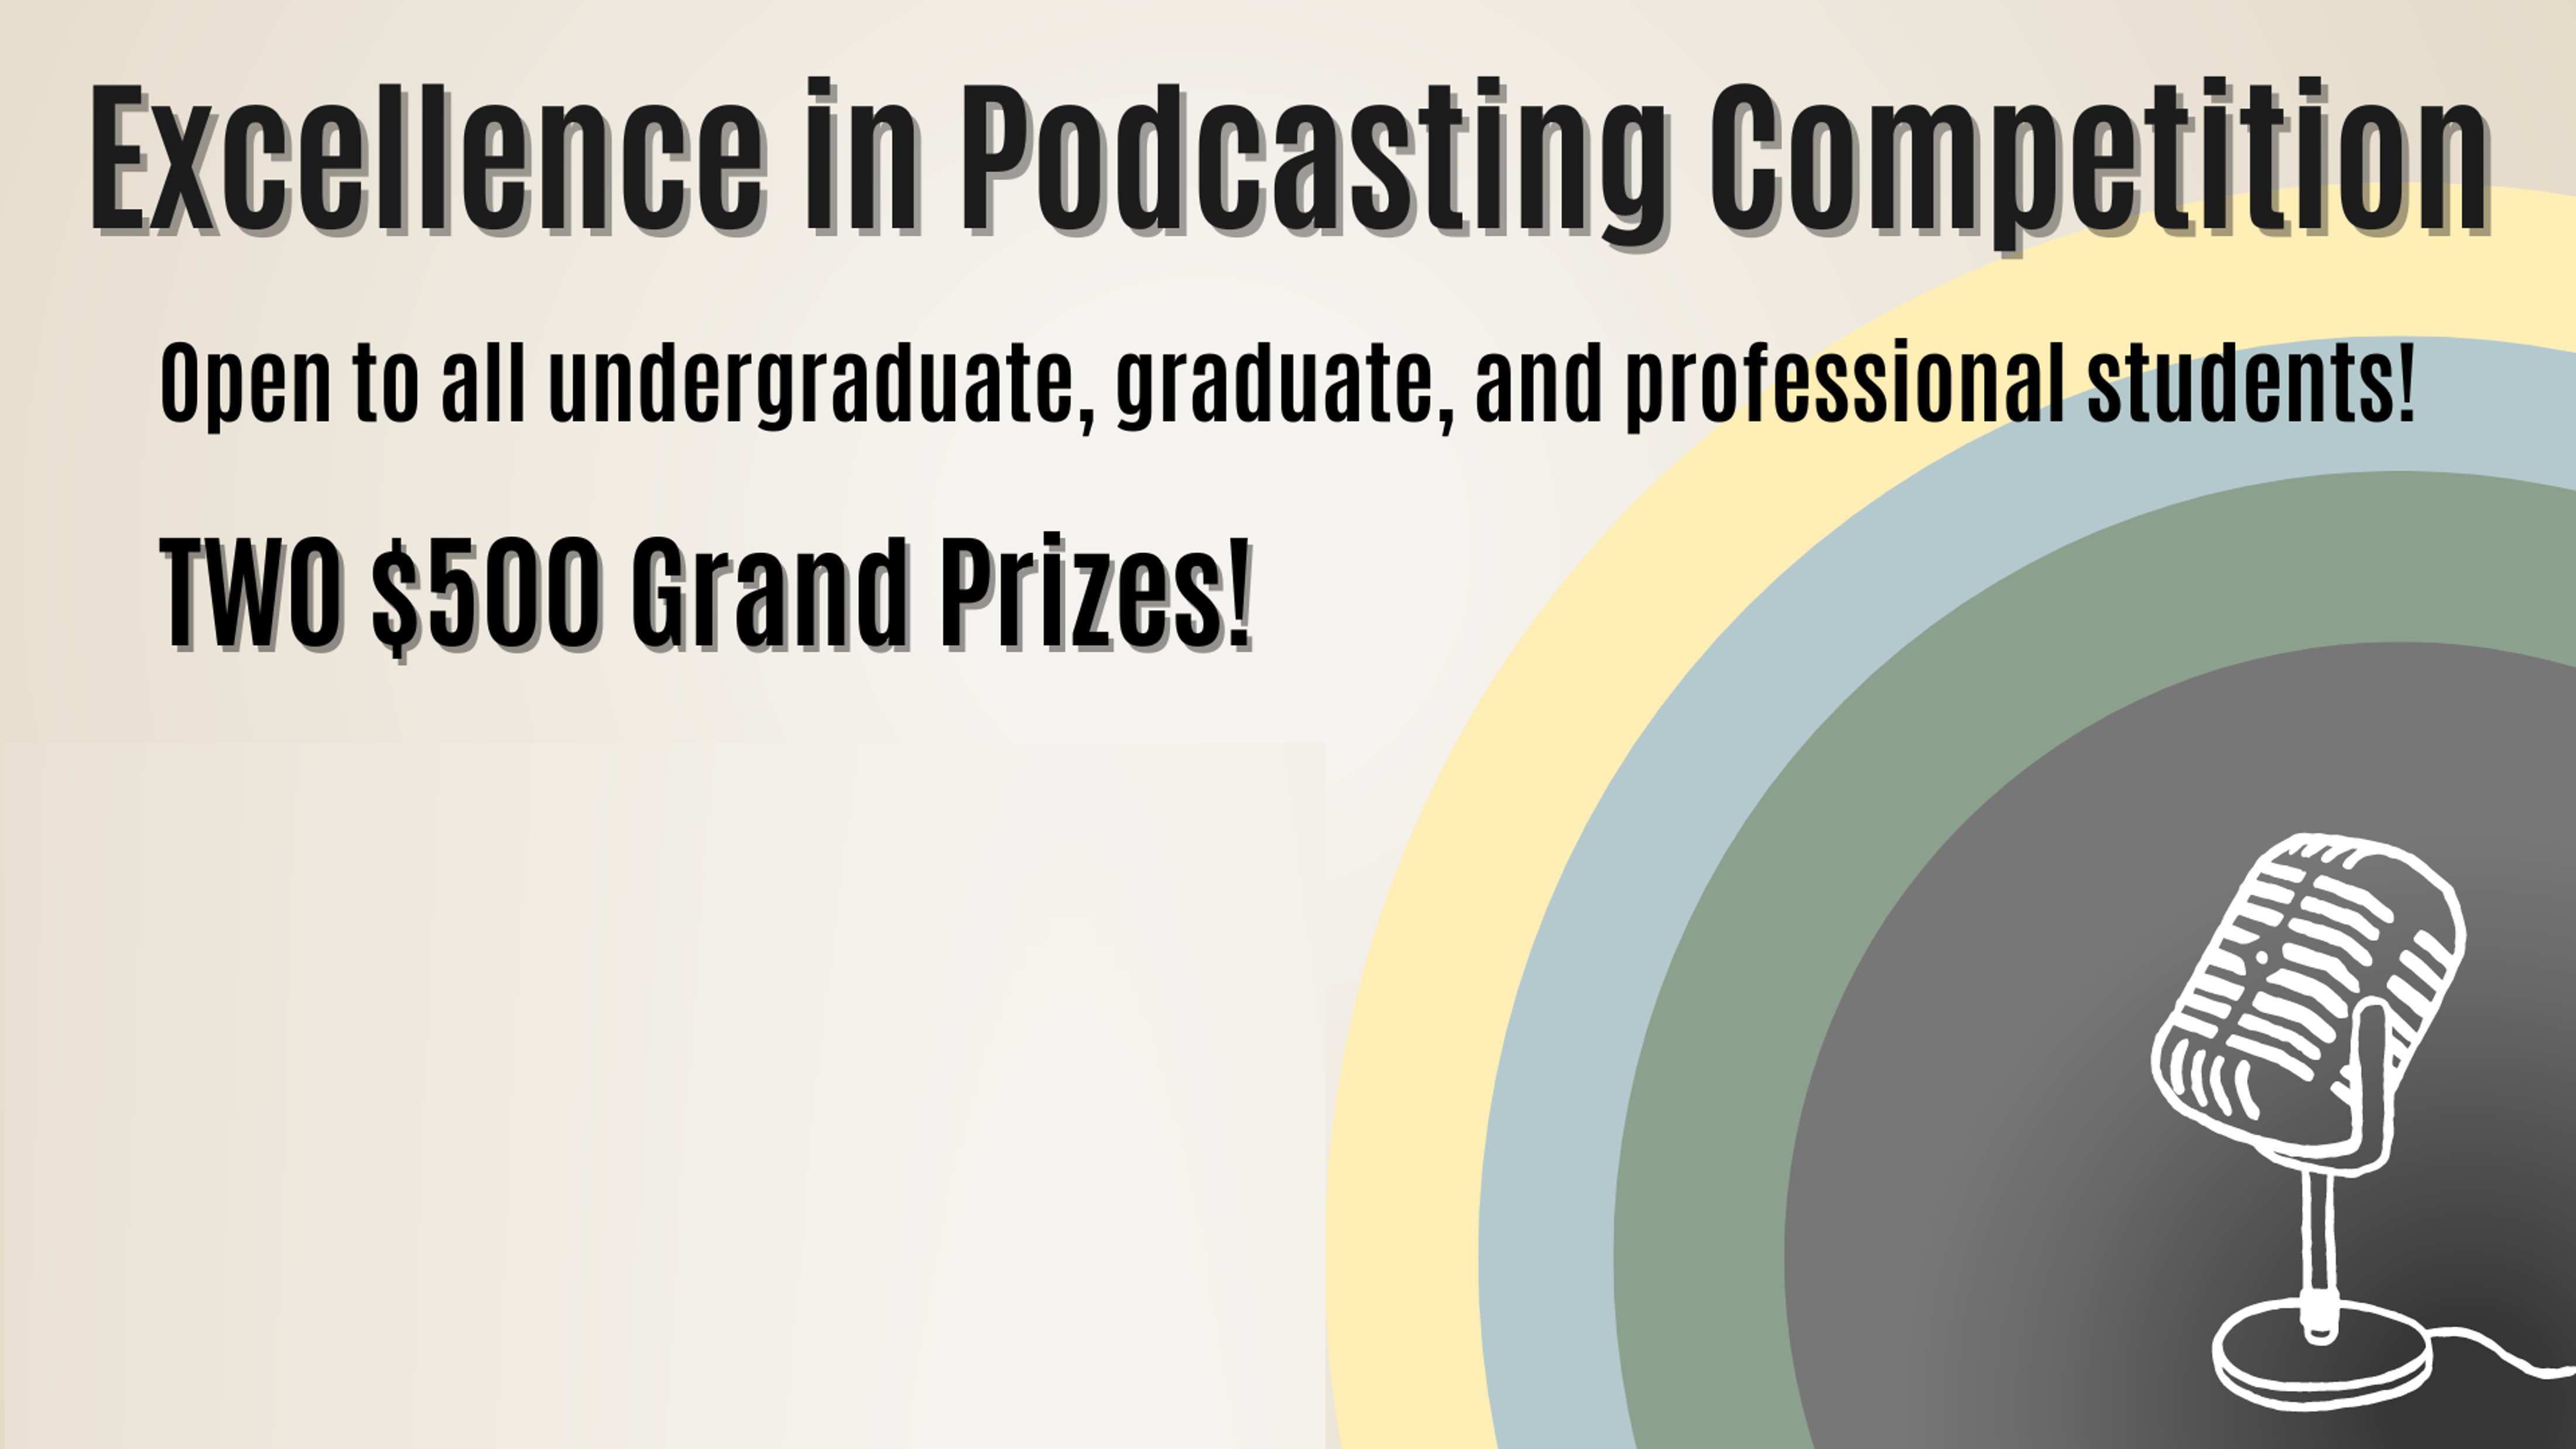 Excellence in Podcasting Competition   Deadline April 19, 12pm